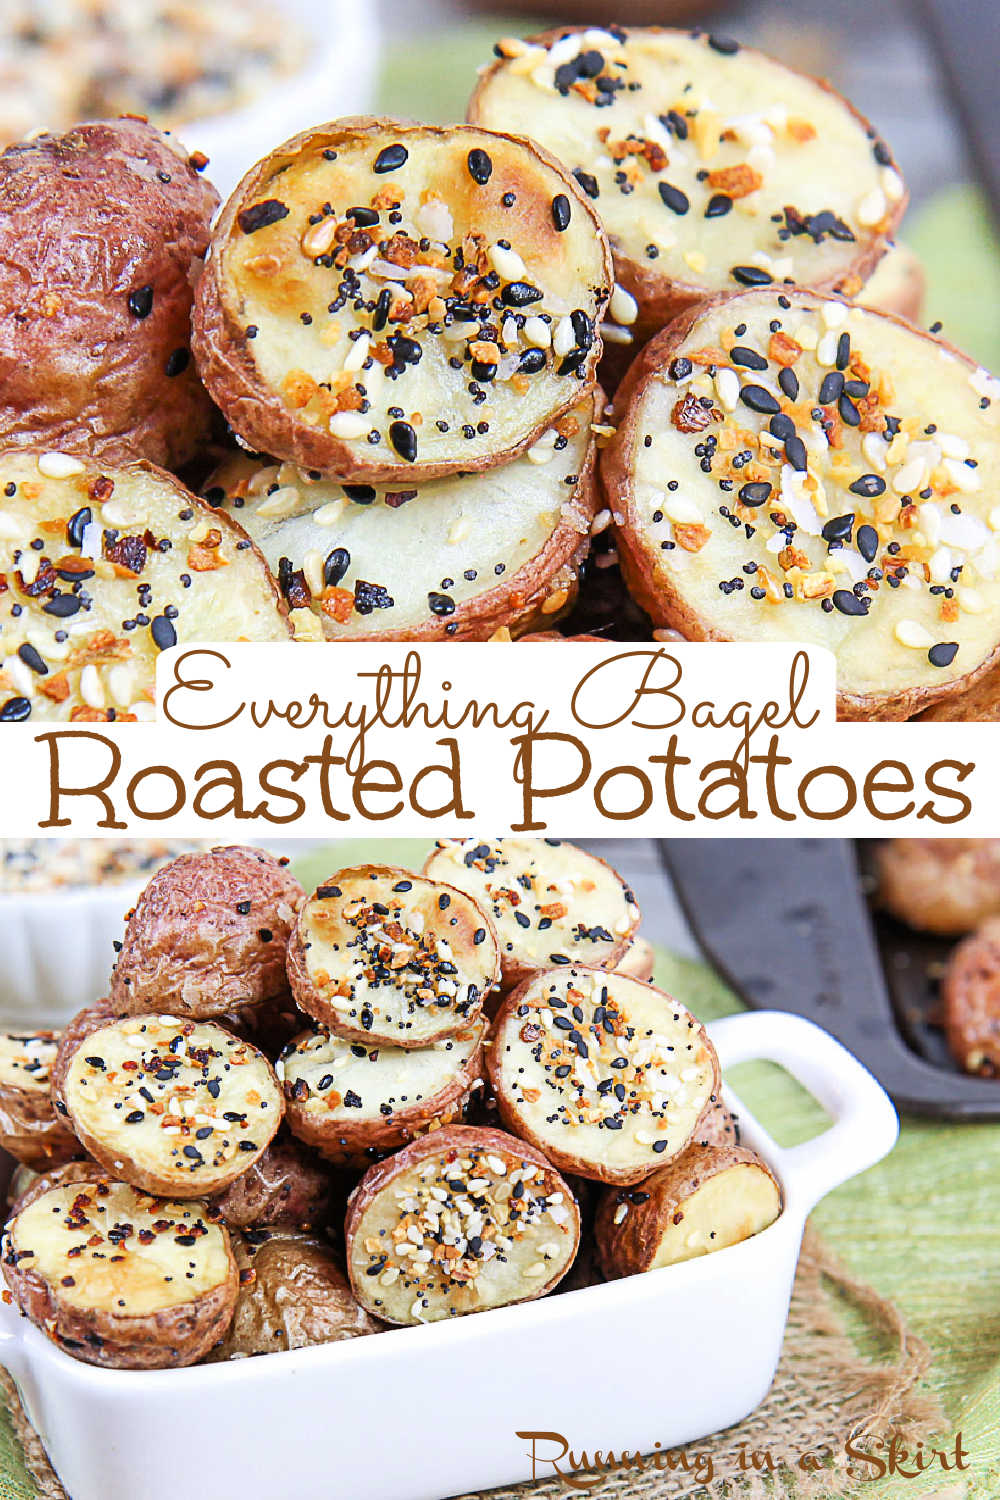 Everything Bagel Roasted Potatoes - Best Everything Bagel Seasoning Potato recipe and use for Everything But the Bagel Seasoning from Trader Joe's. This healthy, clean eating & simple THREE ingredient recipe is the perfect healthy side dish for fish or chicken. Uses red potatoes but you can substitute whatever type of potato you have including sweet potato. Vegan, Vegetarian, Dairy Free, Whole 30 & Gluten Free / Running in a Skirt #everythingbutthebagel #everythingbagelseasoning #traderjoes via @juliewunder